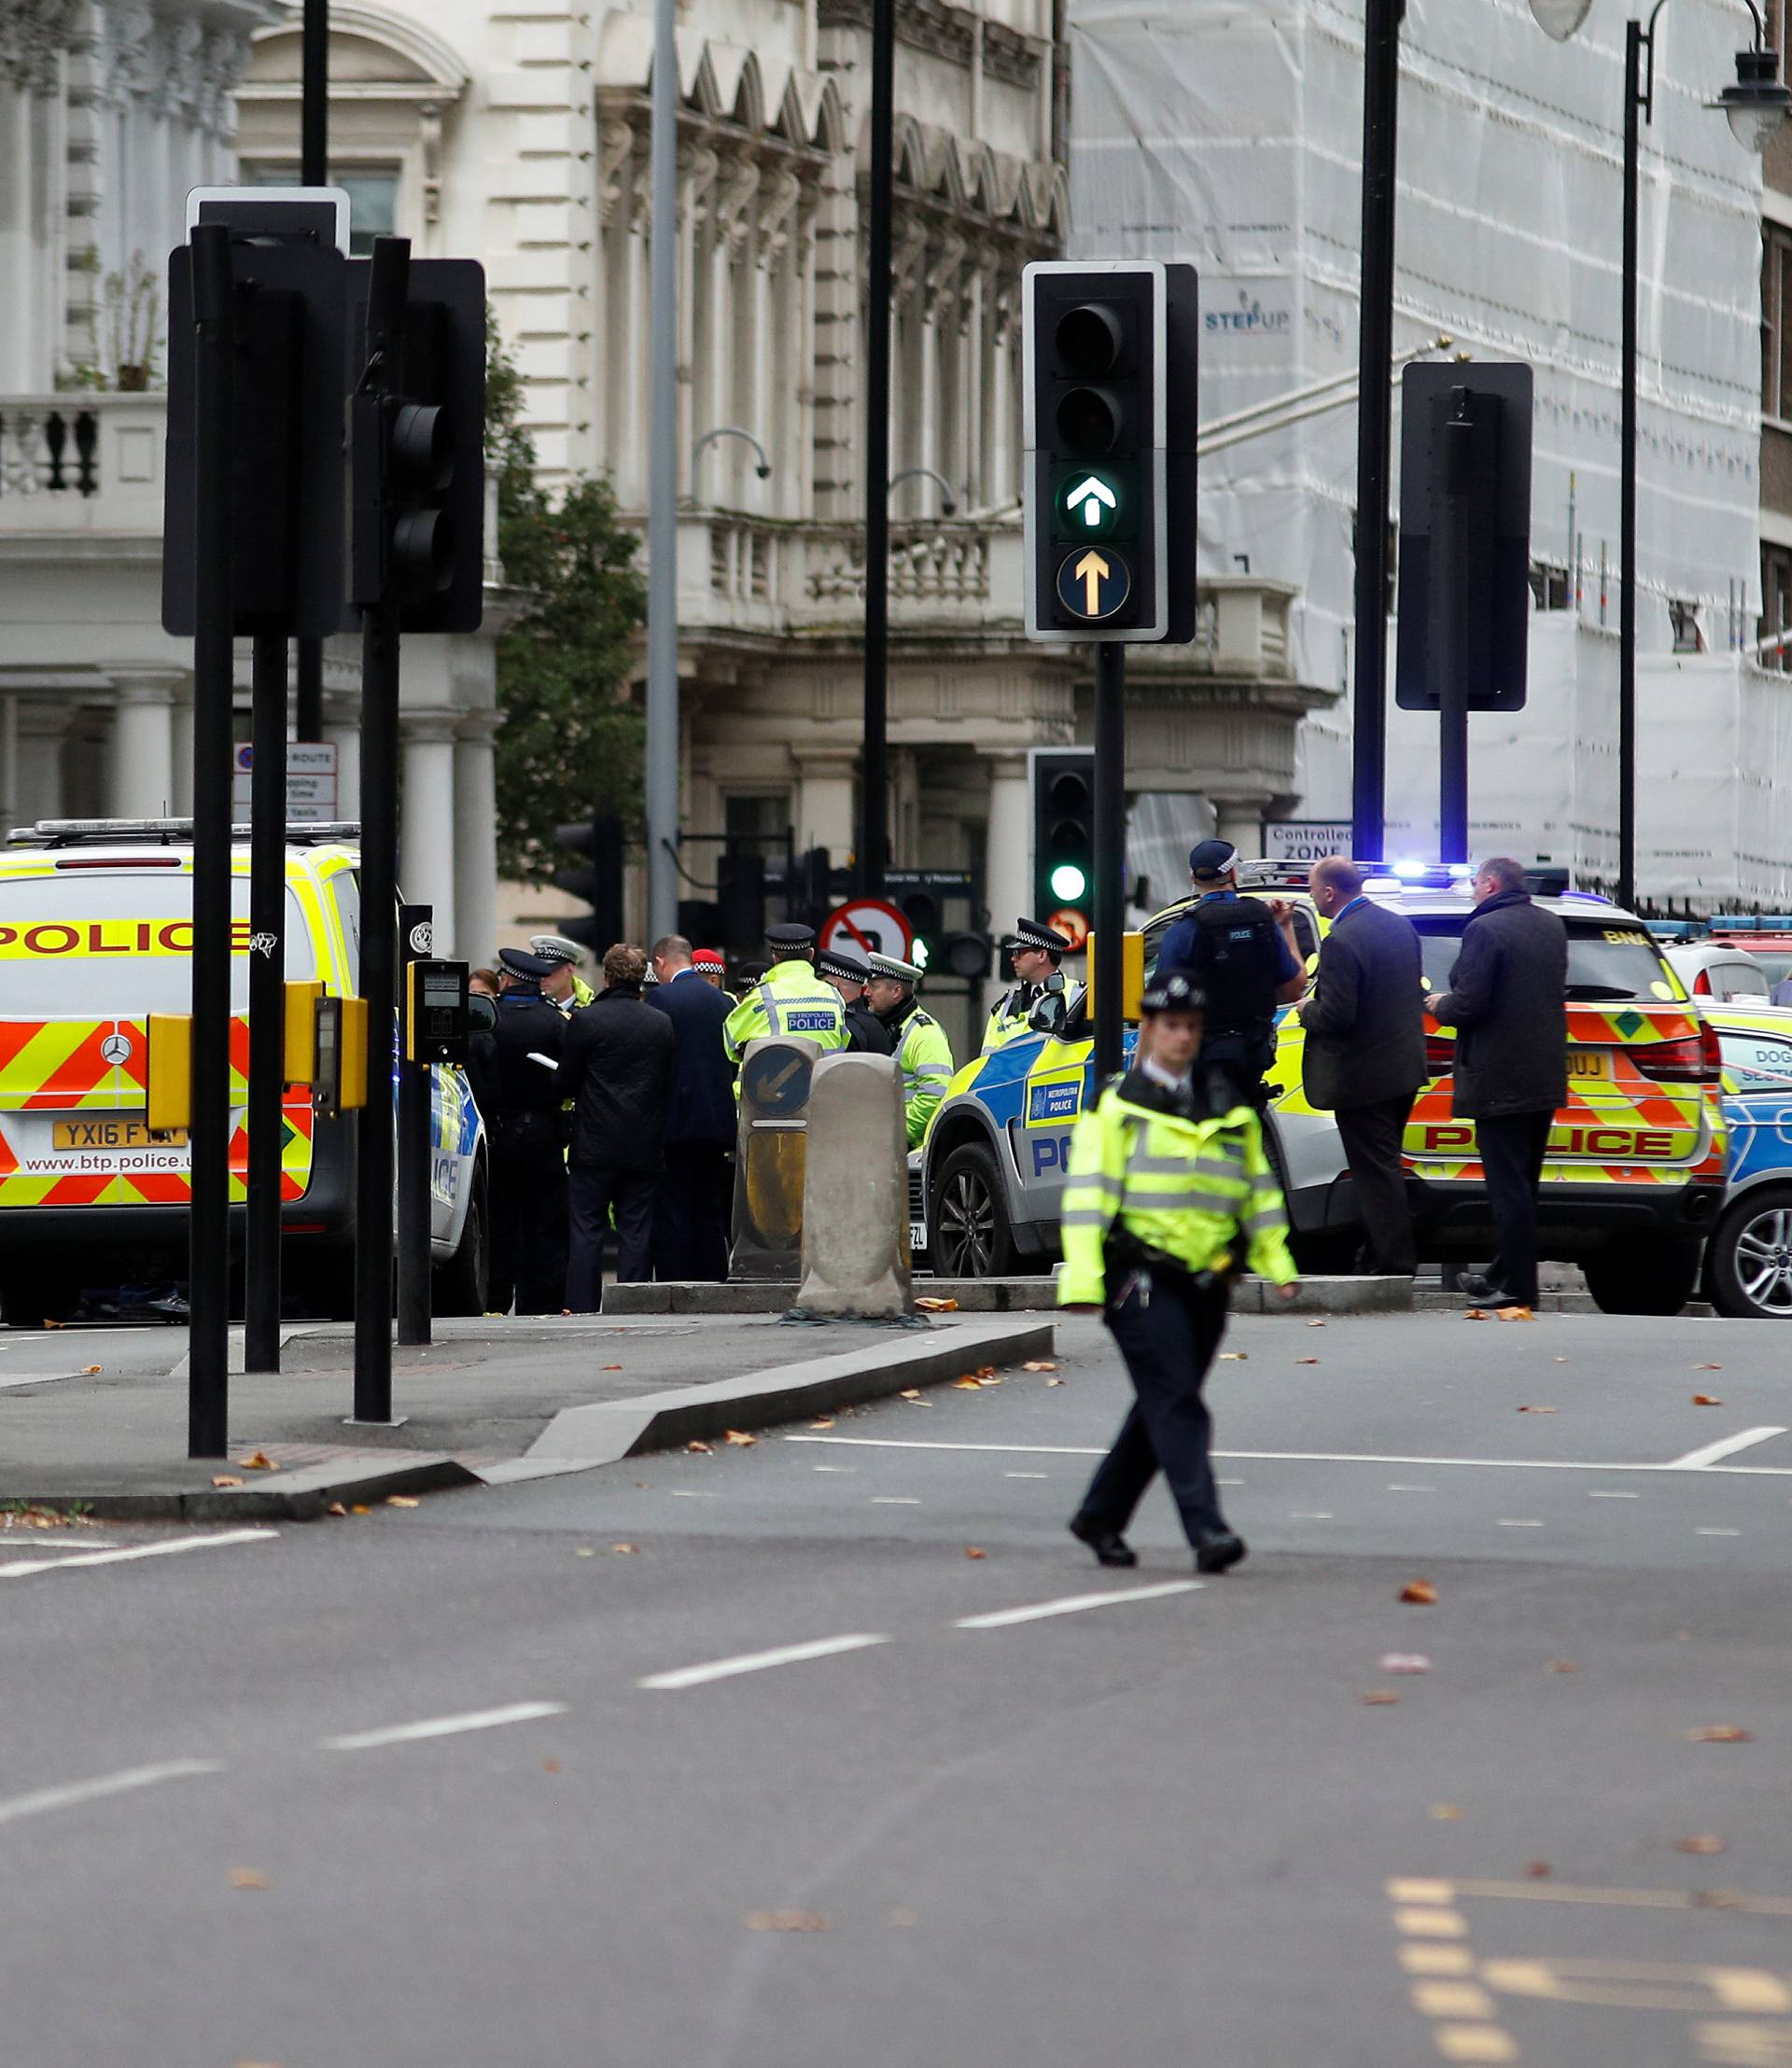 Police officers stand in the road outside the Natural History Museum, after a car mounted the pavement injuring a number of pedestrians, in London